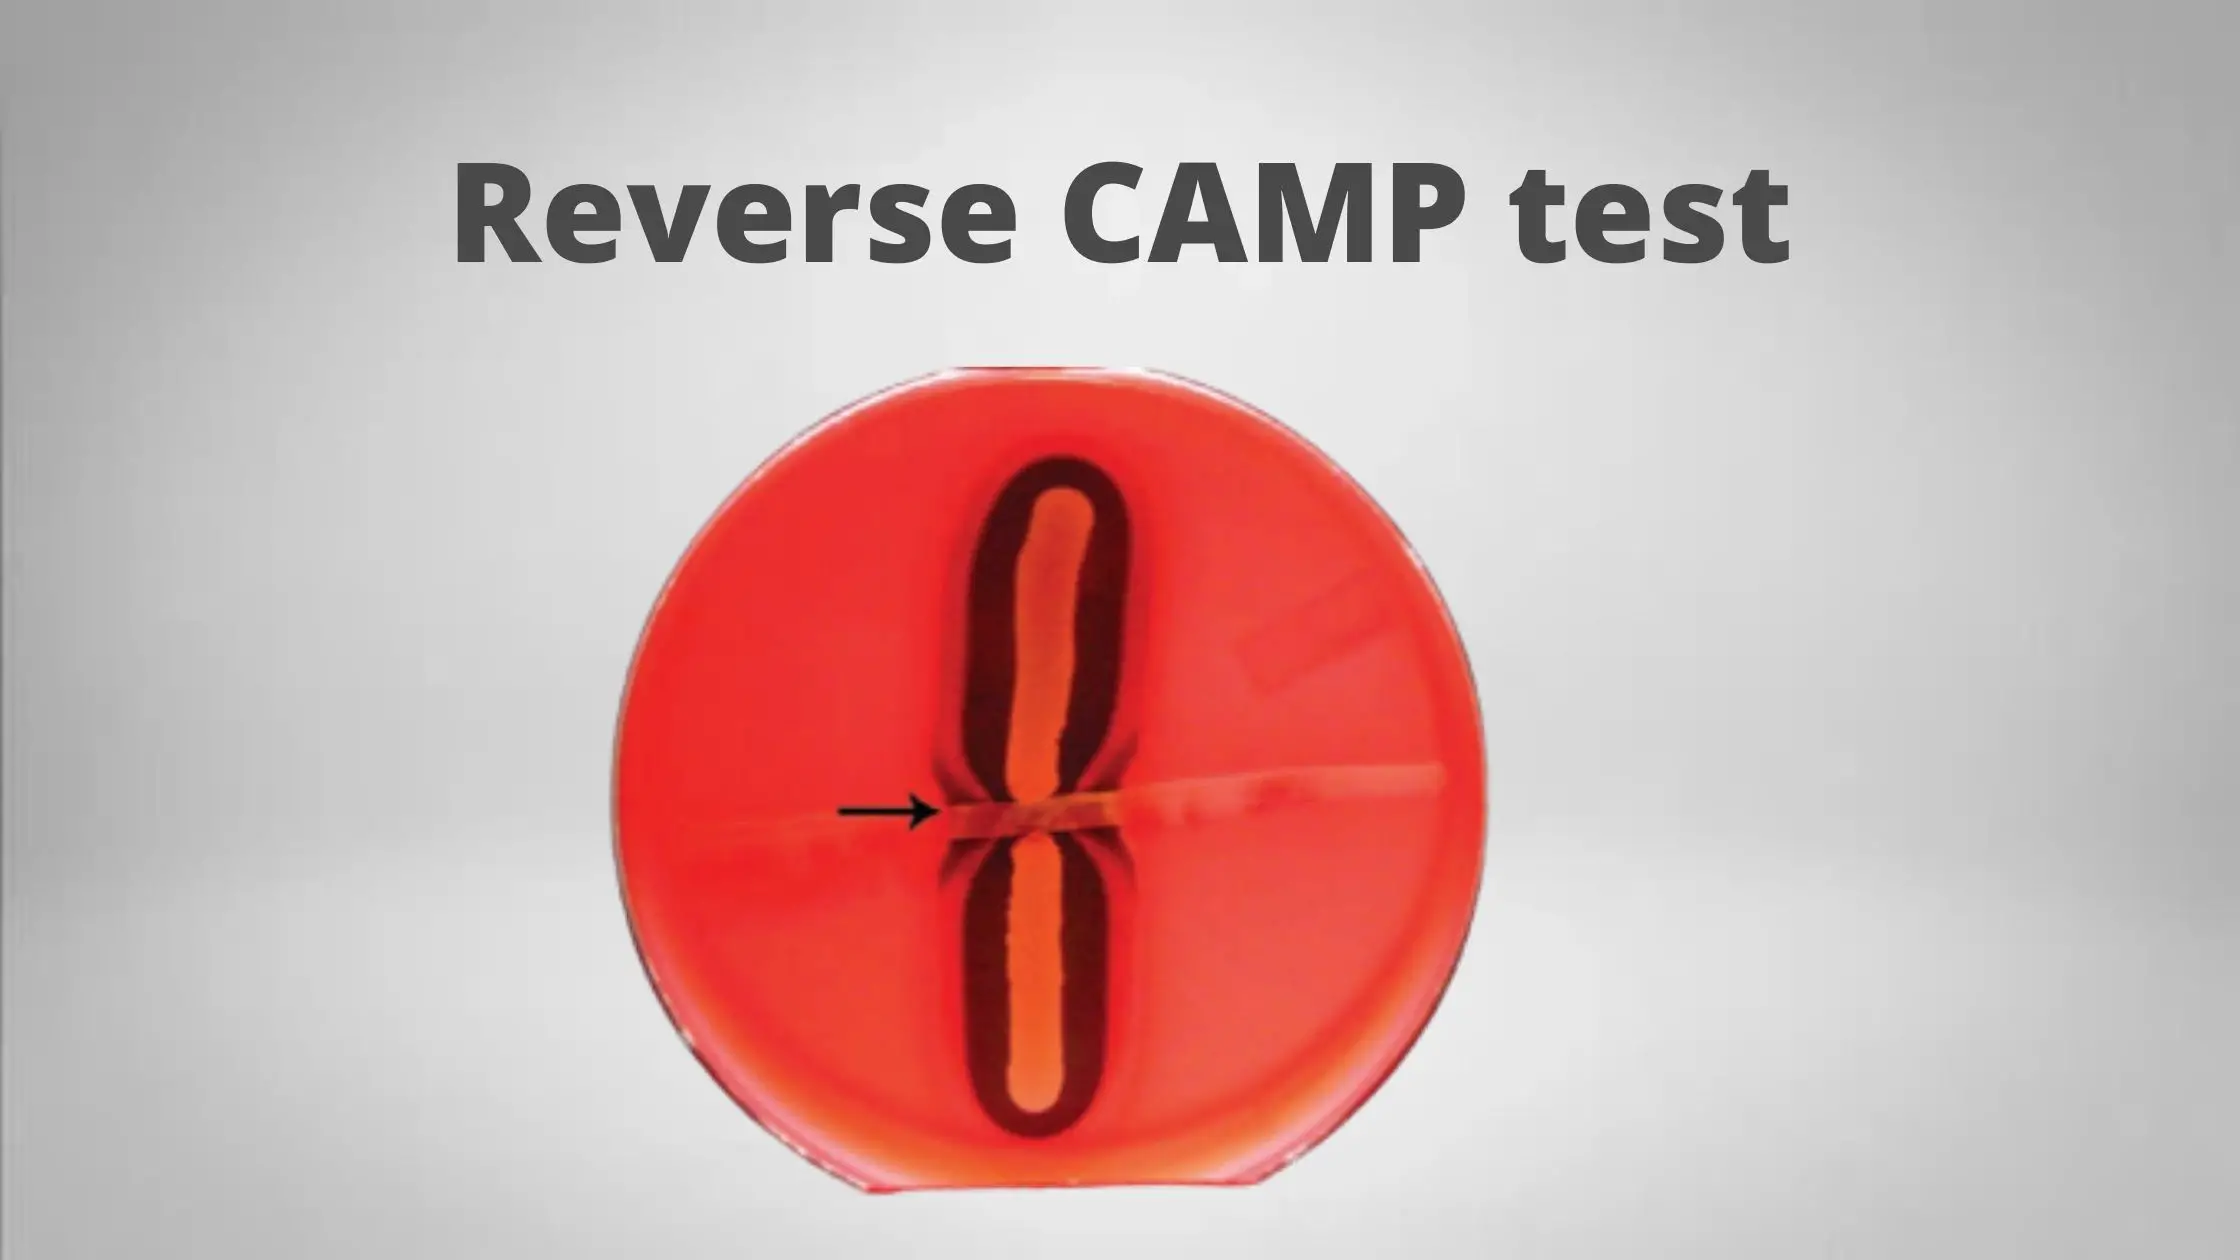 What is Reverse CAMP Test?